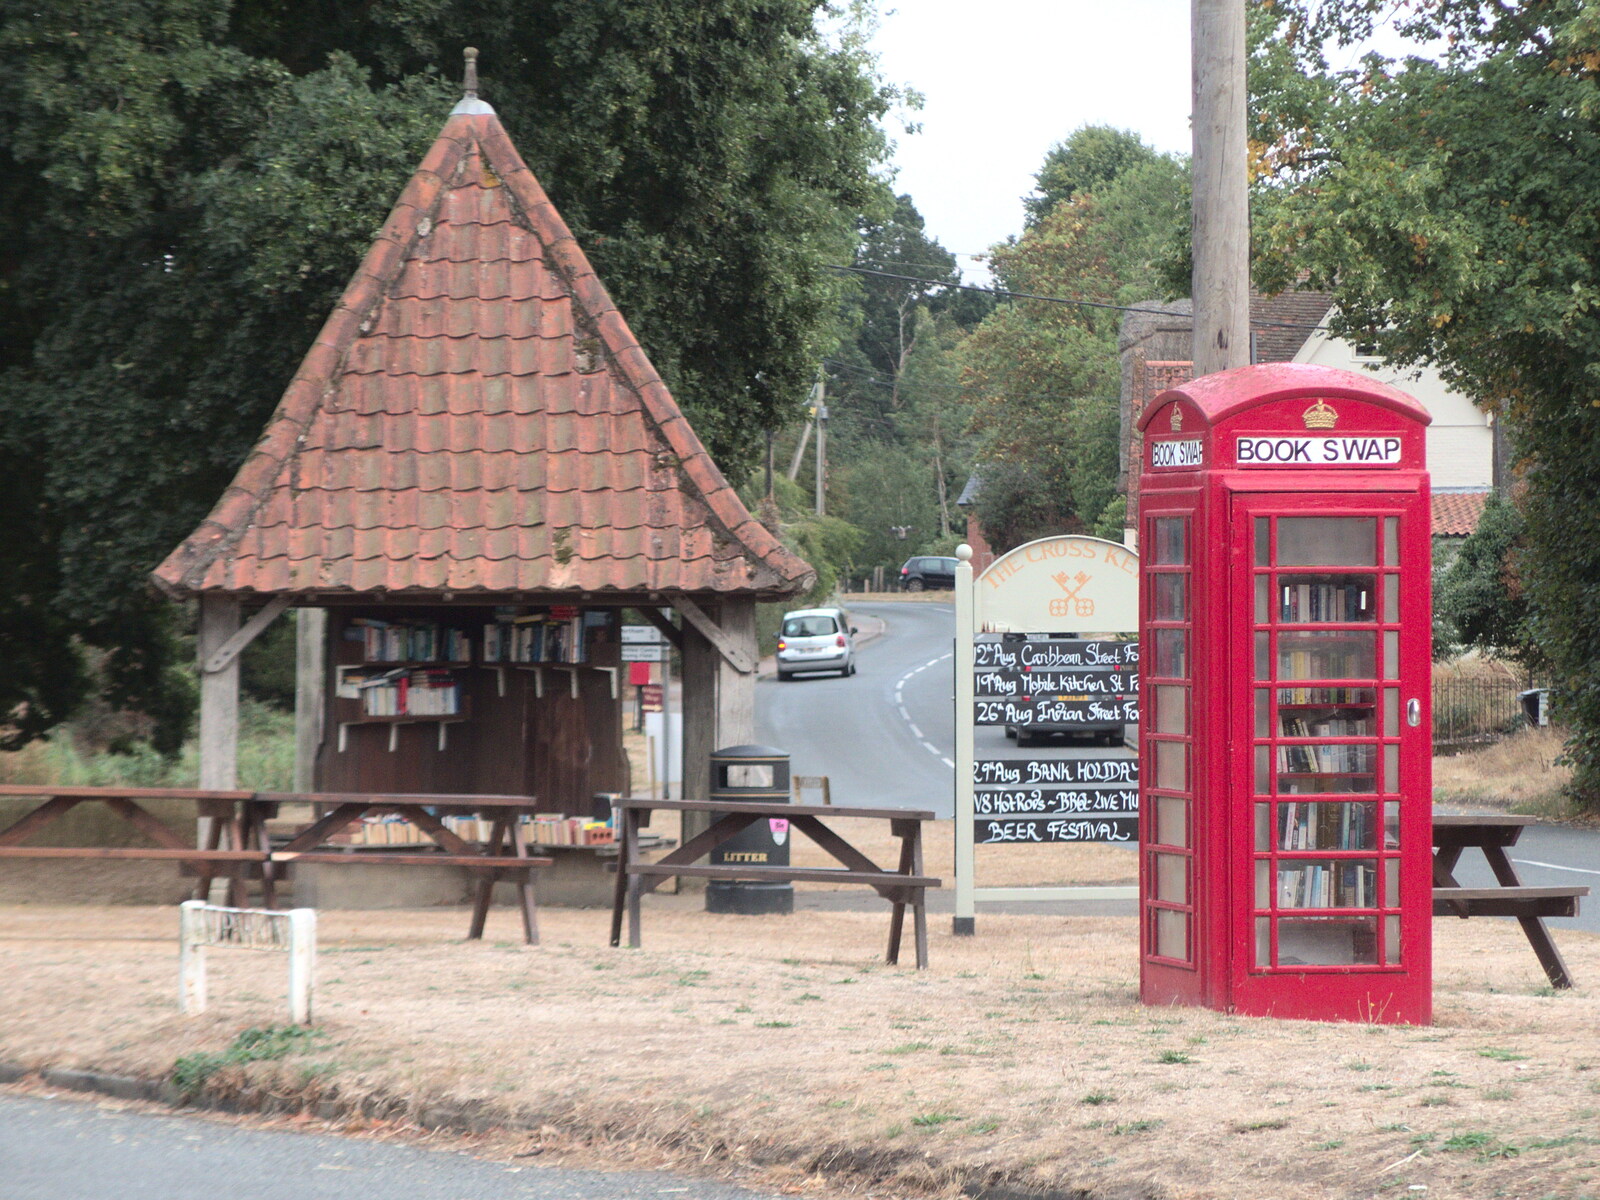 The BSCC at the Cross Keys, Redgrave, Suffolk - 25th August 2022: Book Swap on the village green at Redgrave